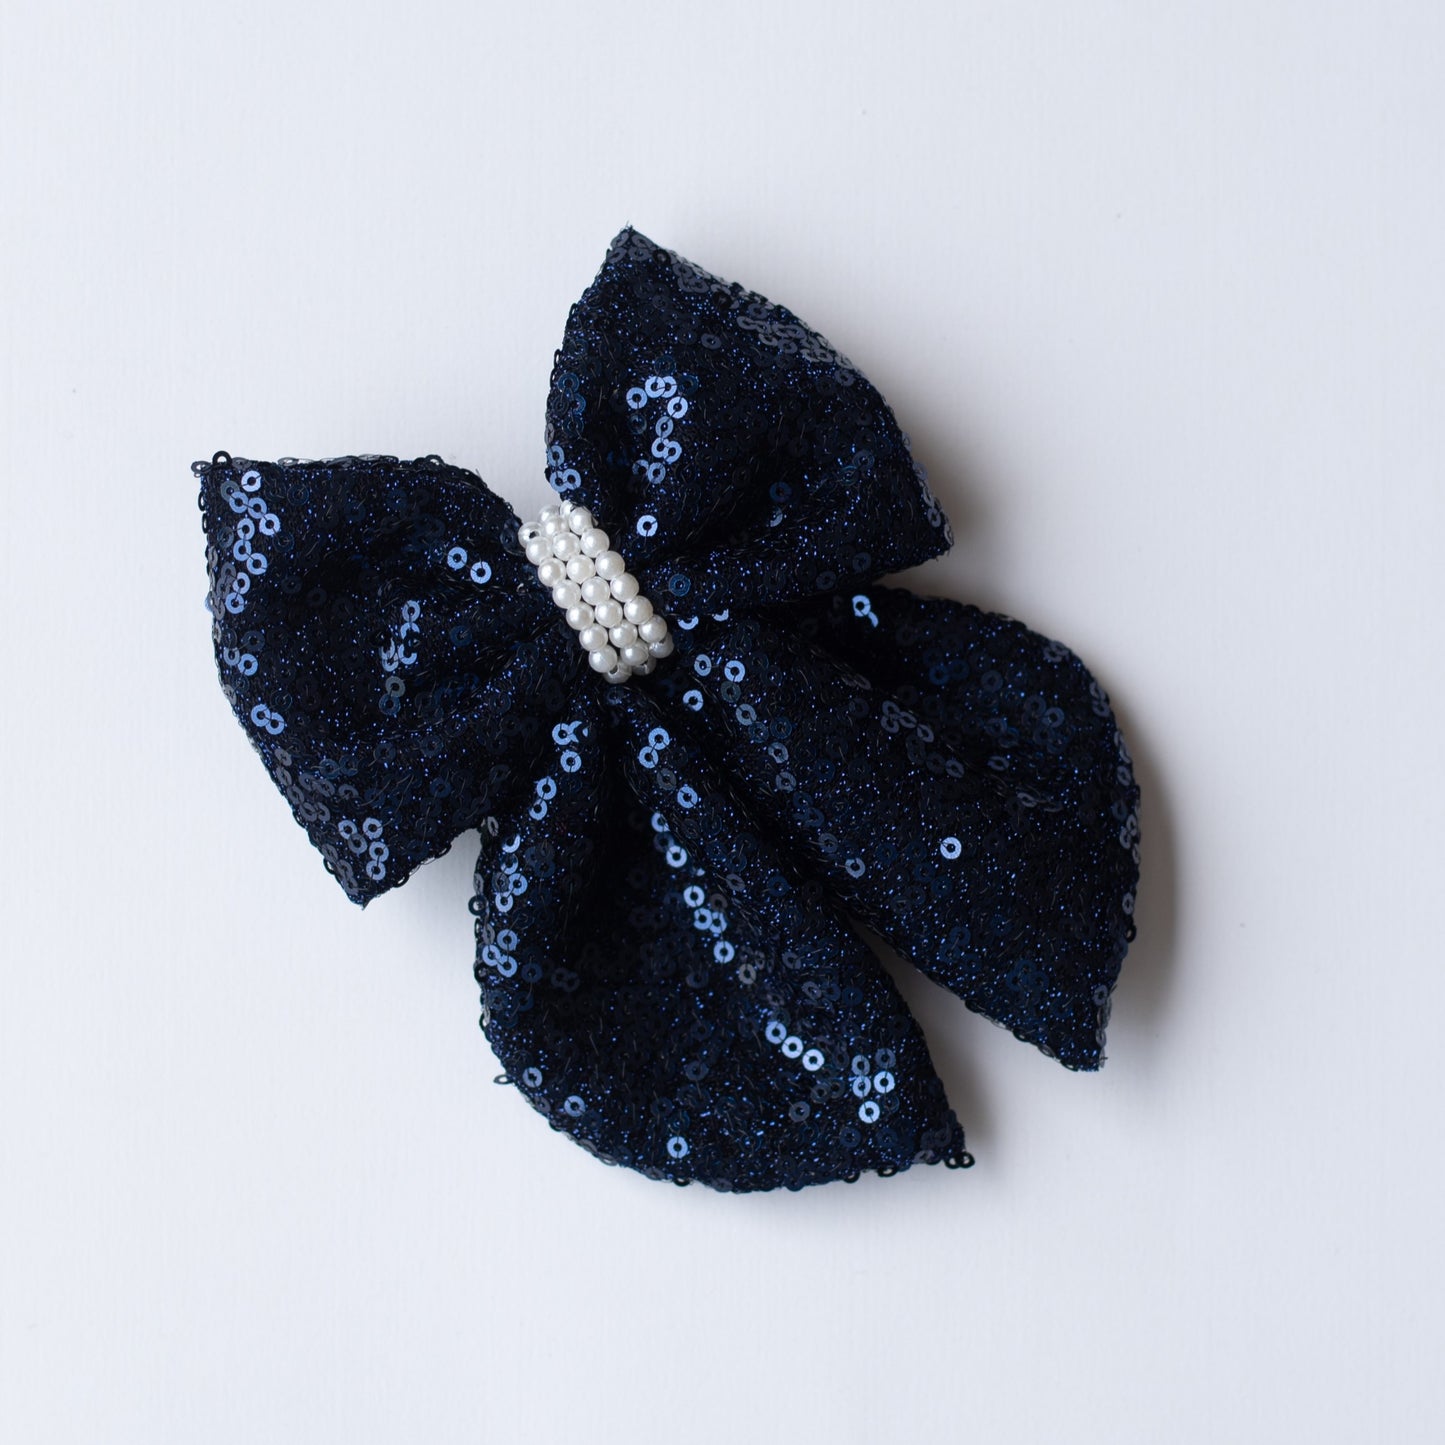 Fancy party sequins big bow with embellished pearls on barette clip - Navy Blue